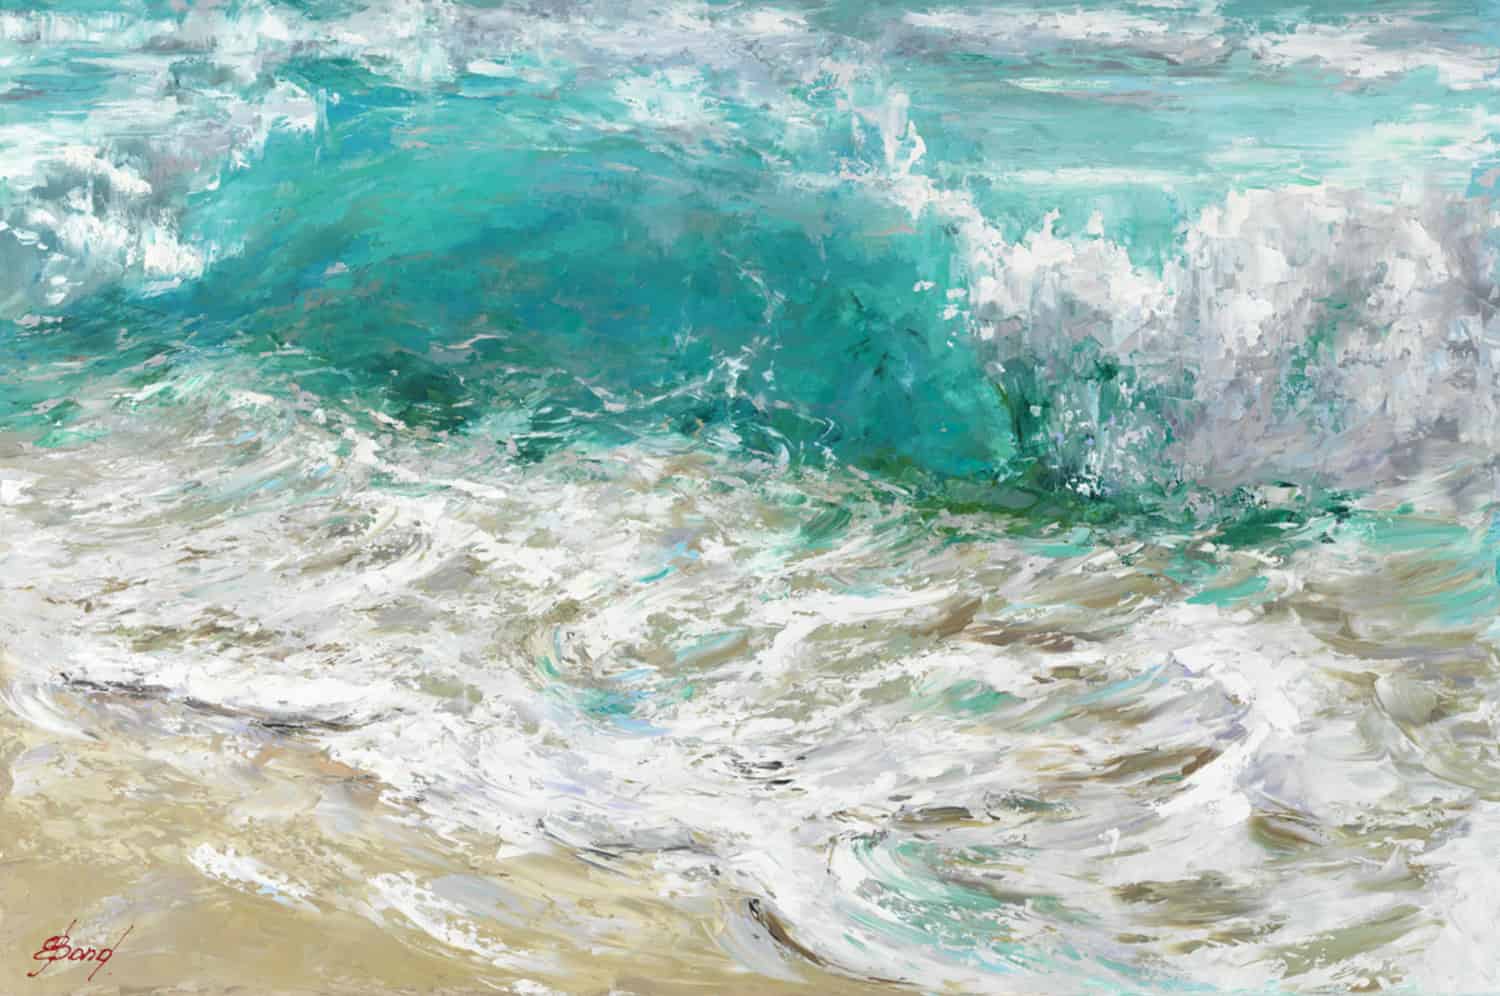 Buy a painting of a big wave called Emerald Tides